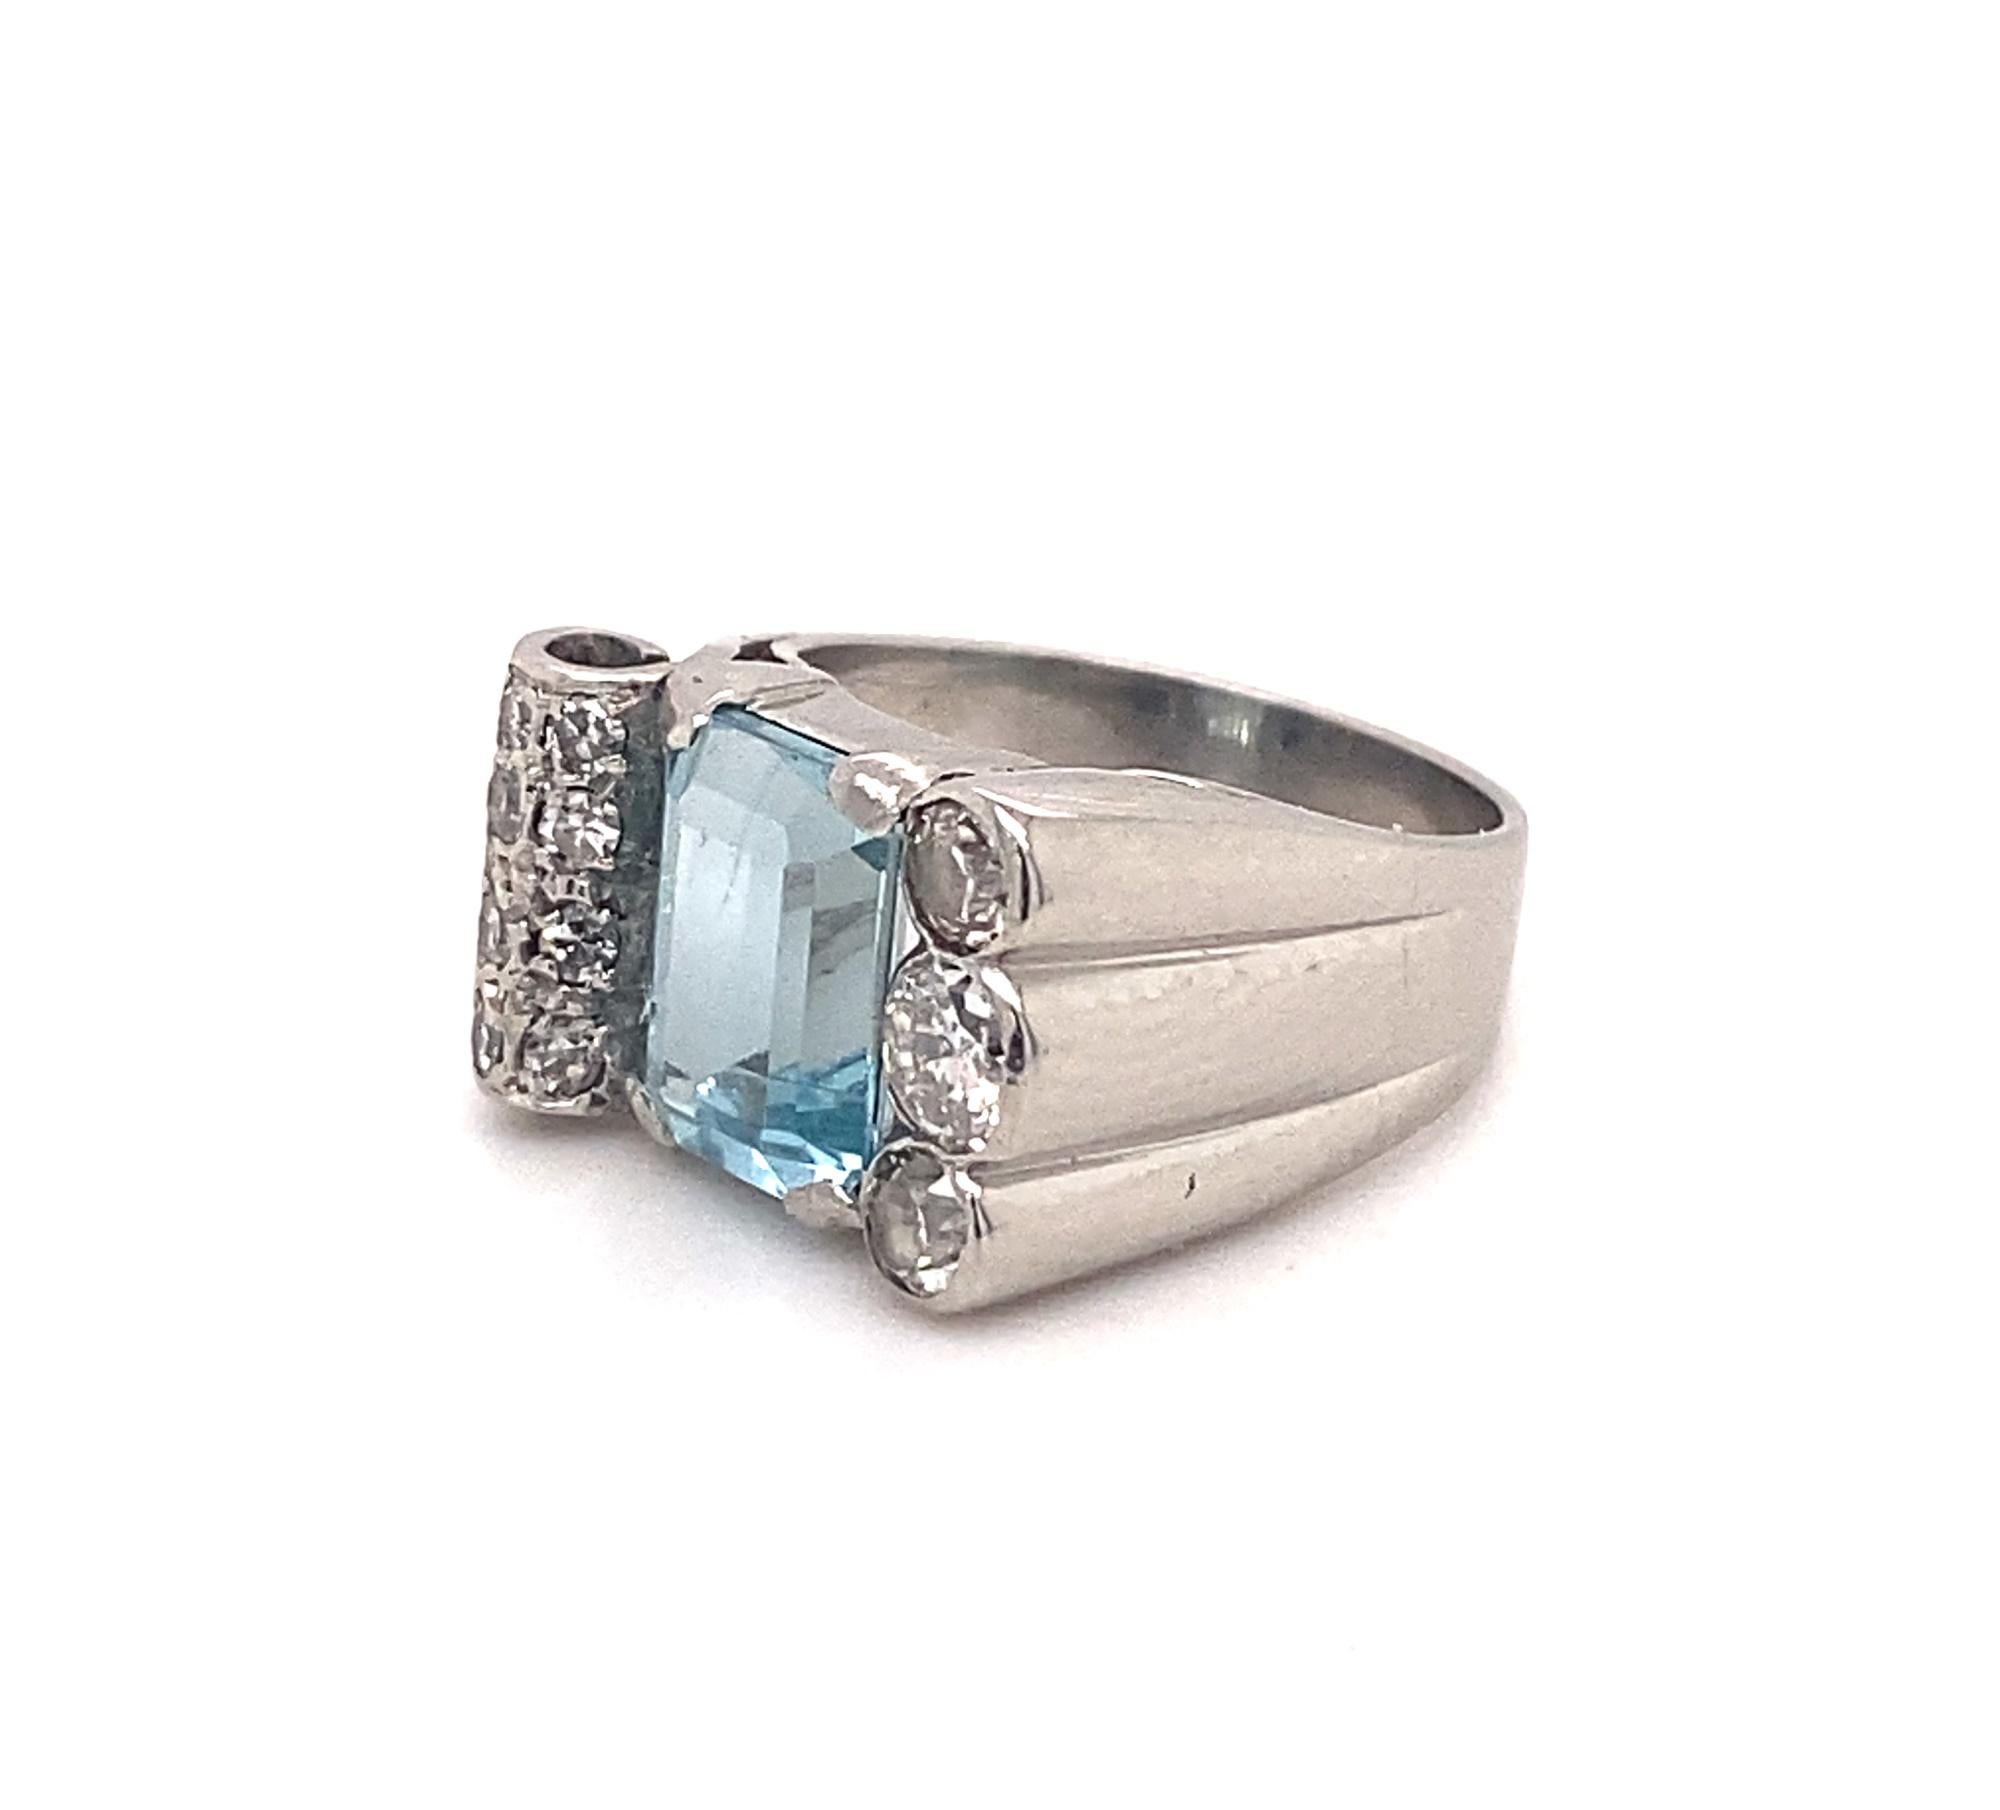 Art Deco Platinum Diamonds Aquamarine Ring. This exquisite ring is set with a natural gem quality 2.5 carats Aquamarine in the center of the ring. The aquamarine has gorgeous color and clarity. On one side of the ring are 3 large old rose cut